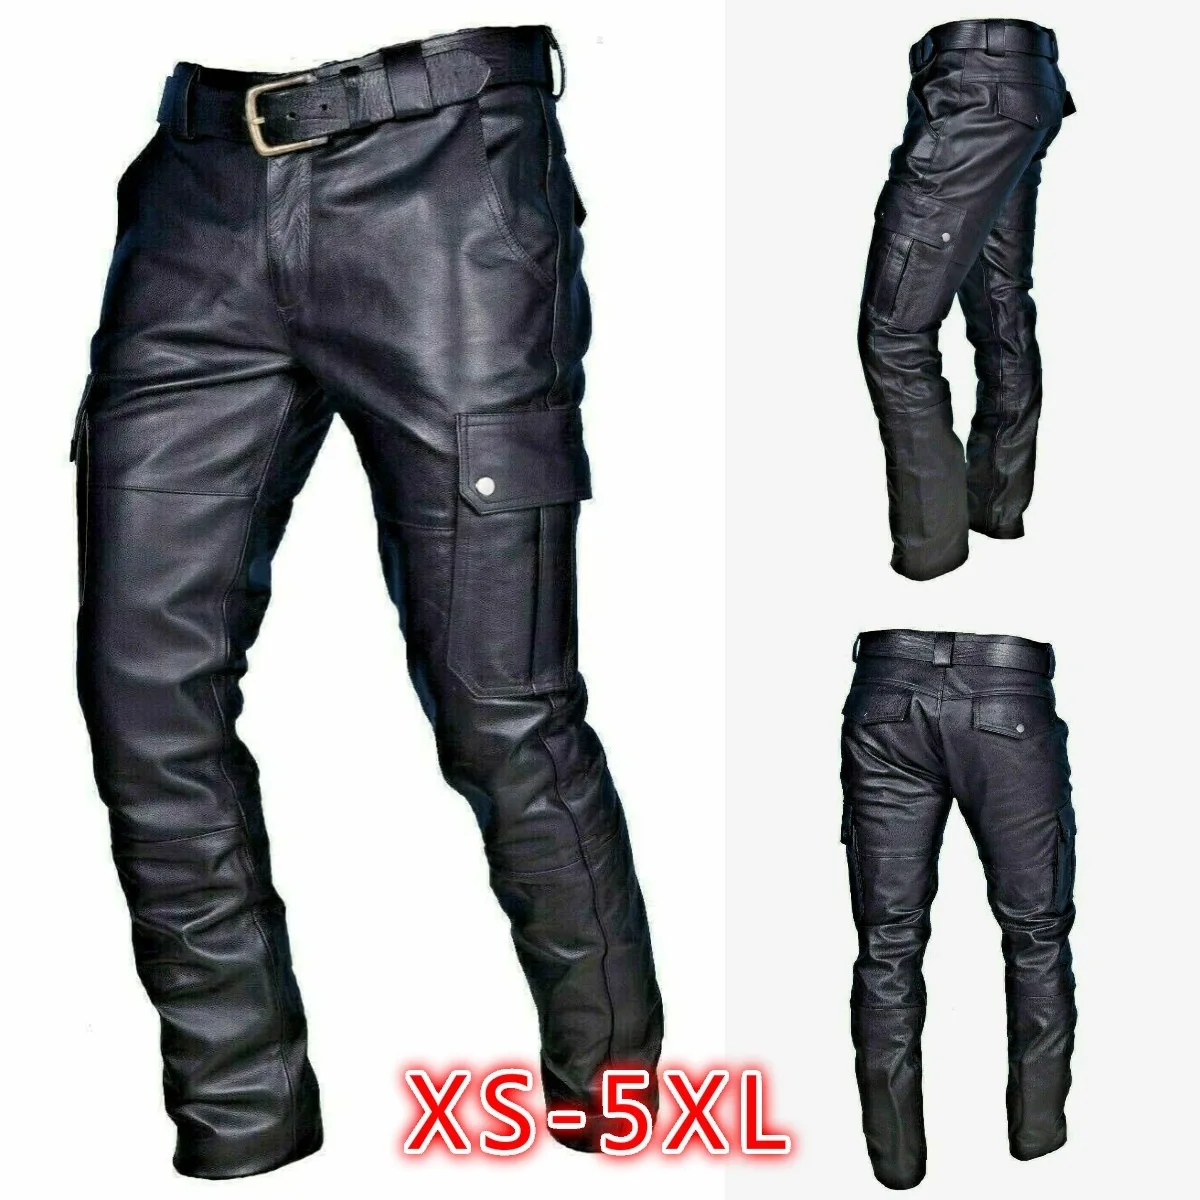 New Solid Color Fashion PU Leather Pants Casual Leather Motorcycle Pants Punk Style Full Length Trousers Streetwear Men 2